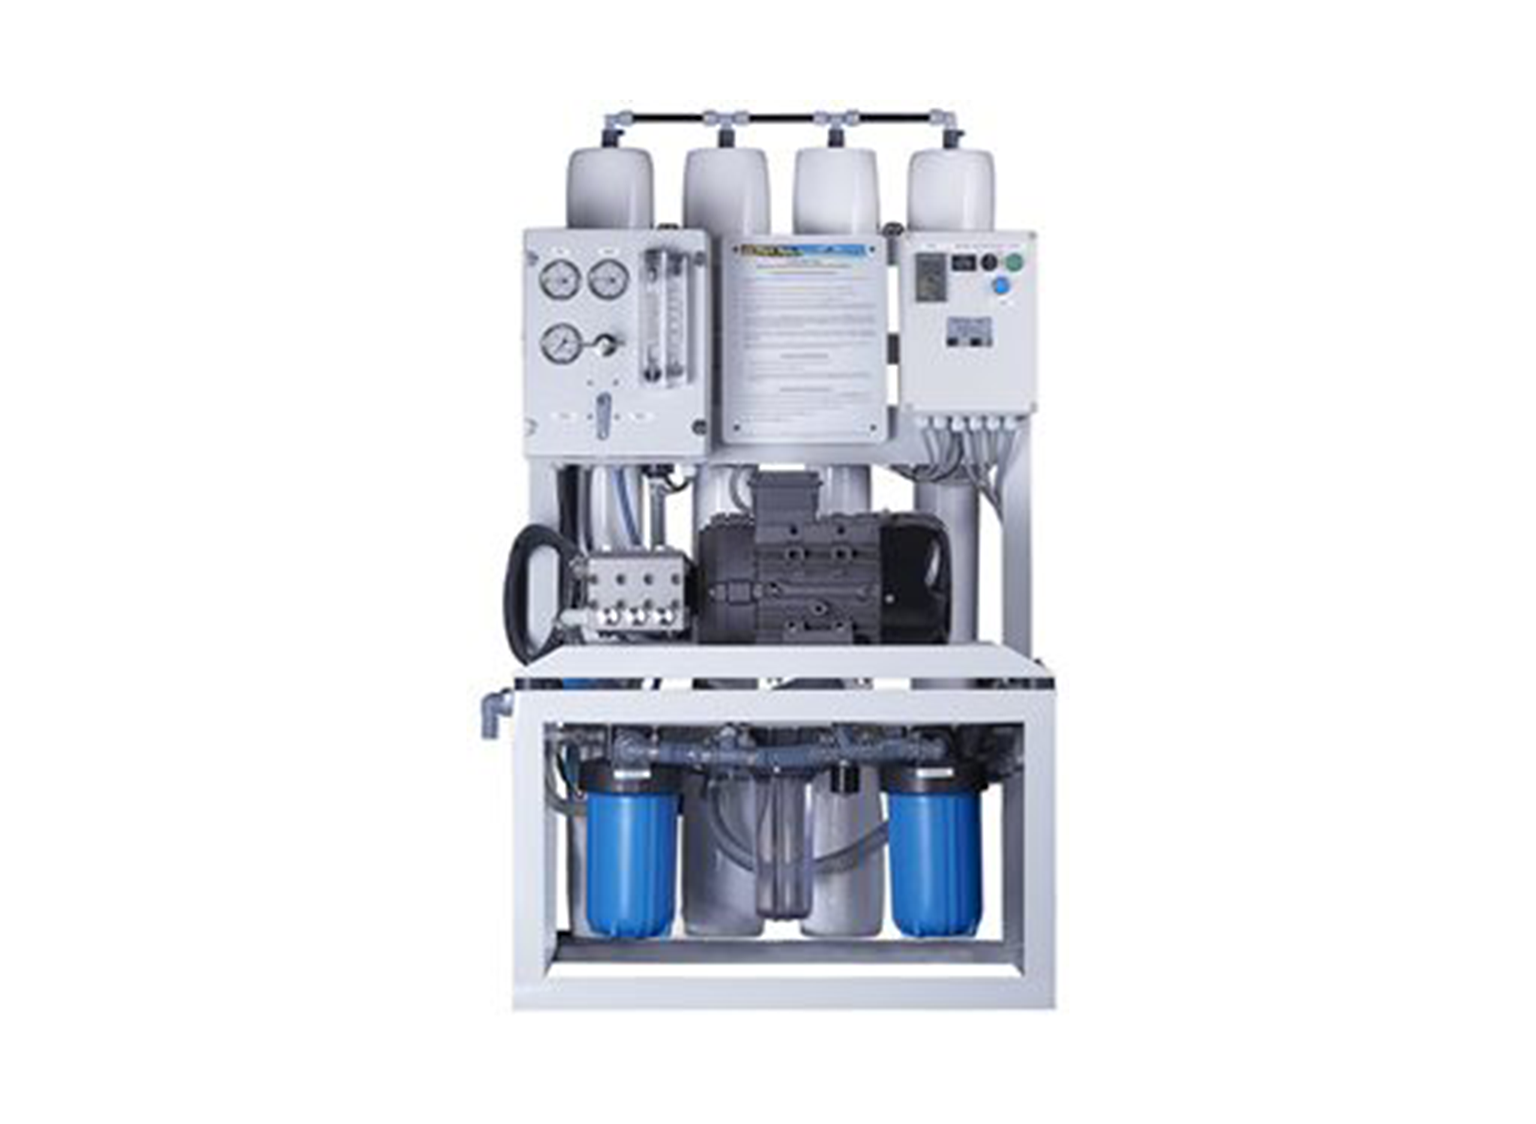 On-shore Desalination – up to 10,000 GPD/37,900 LPD